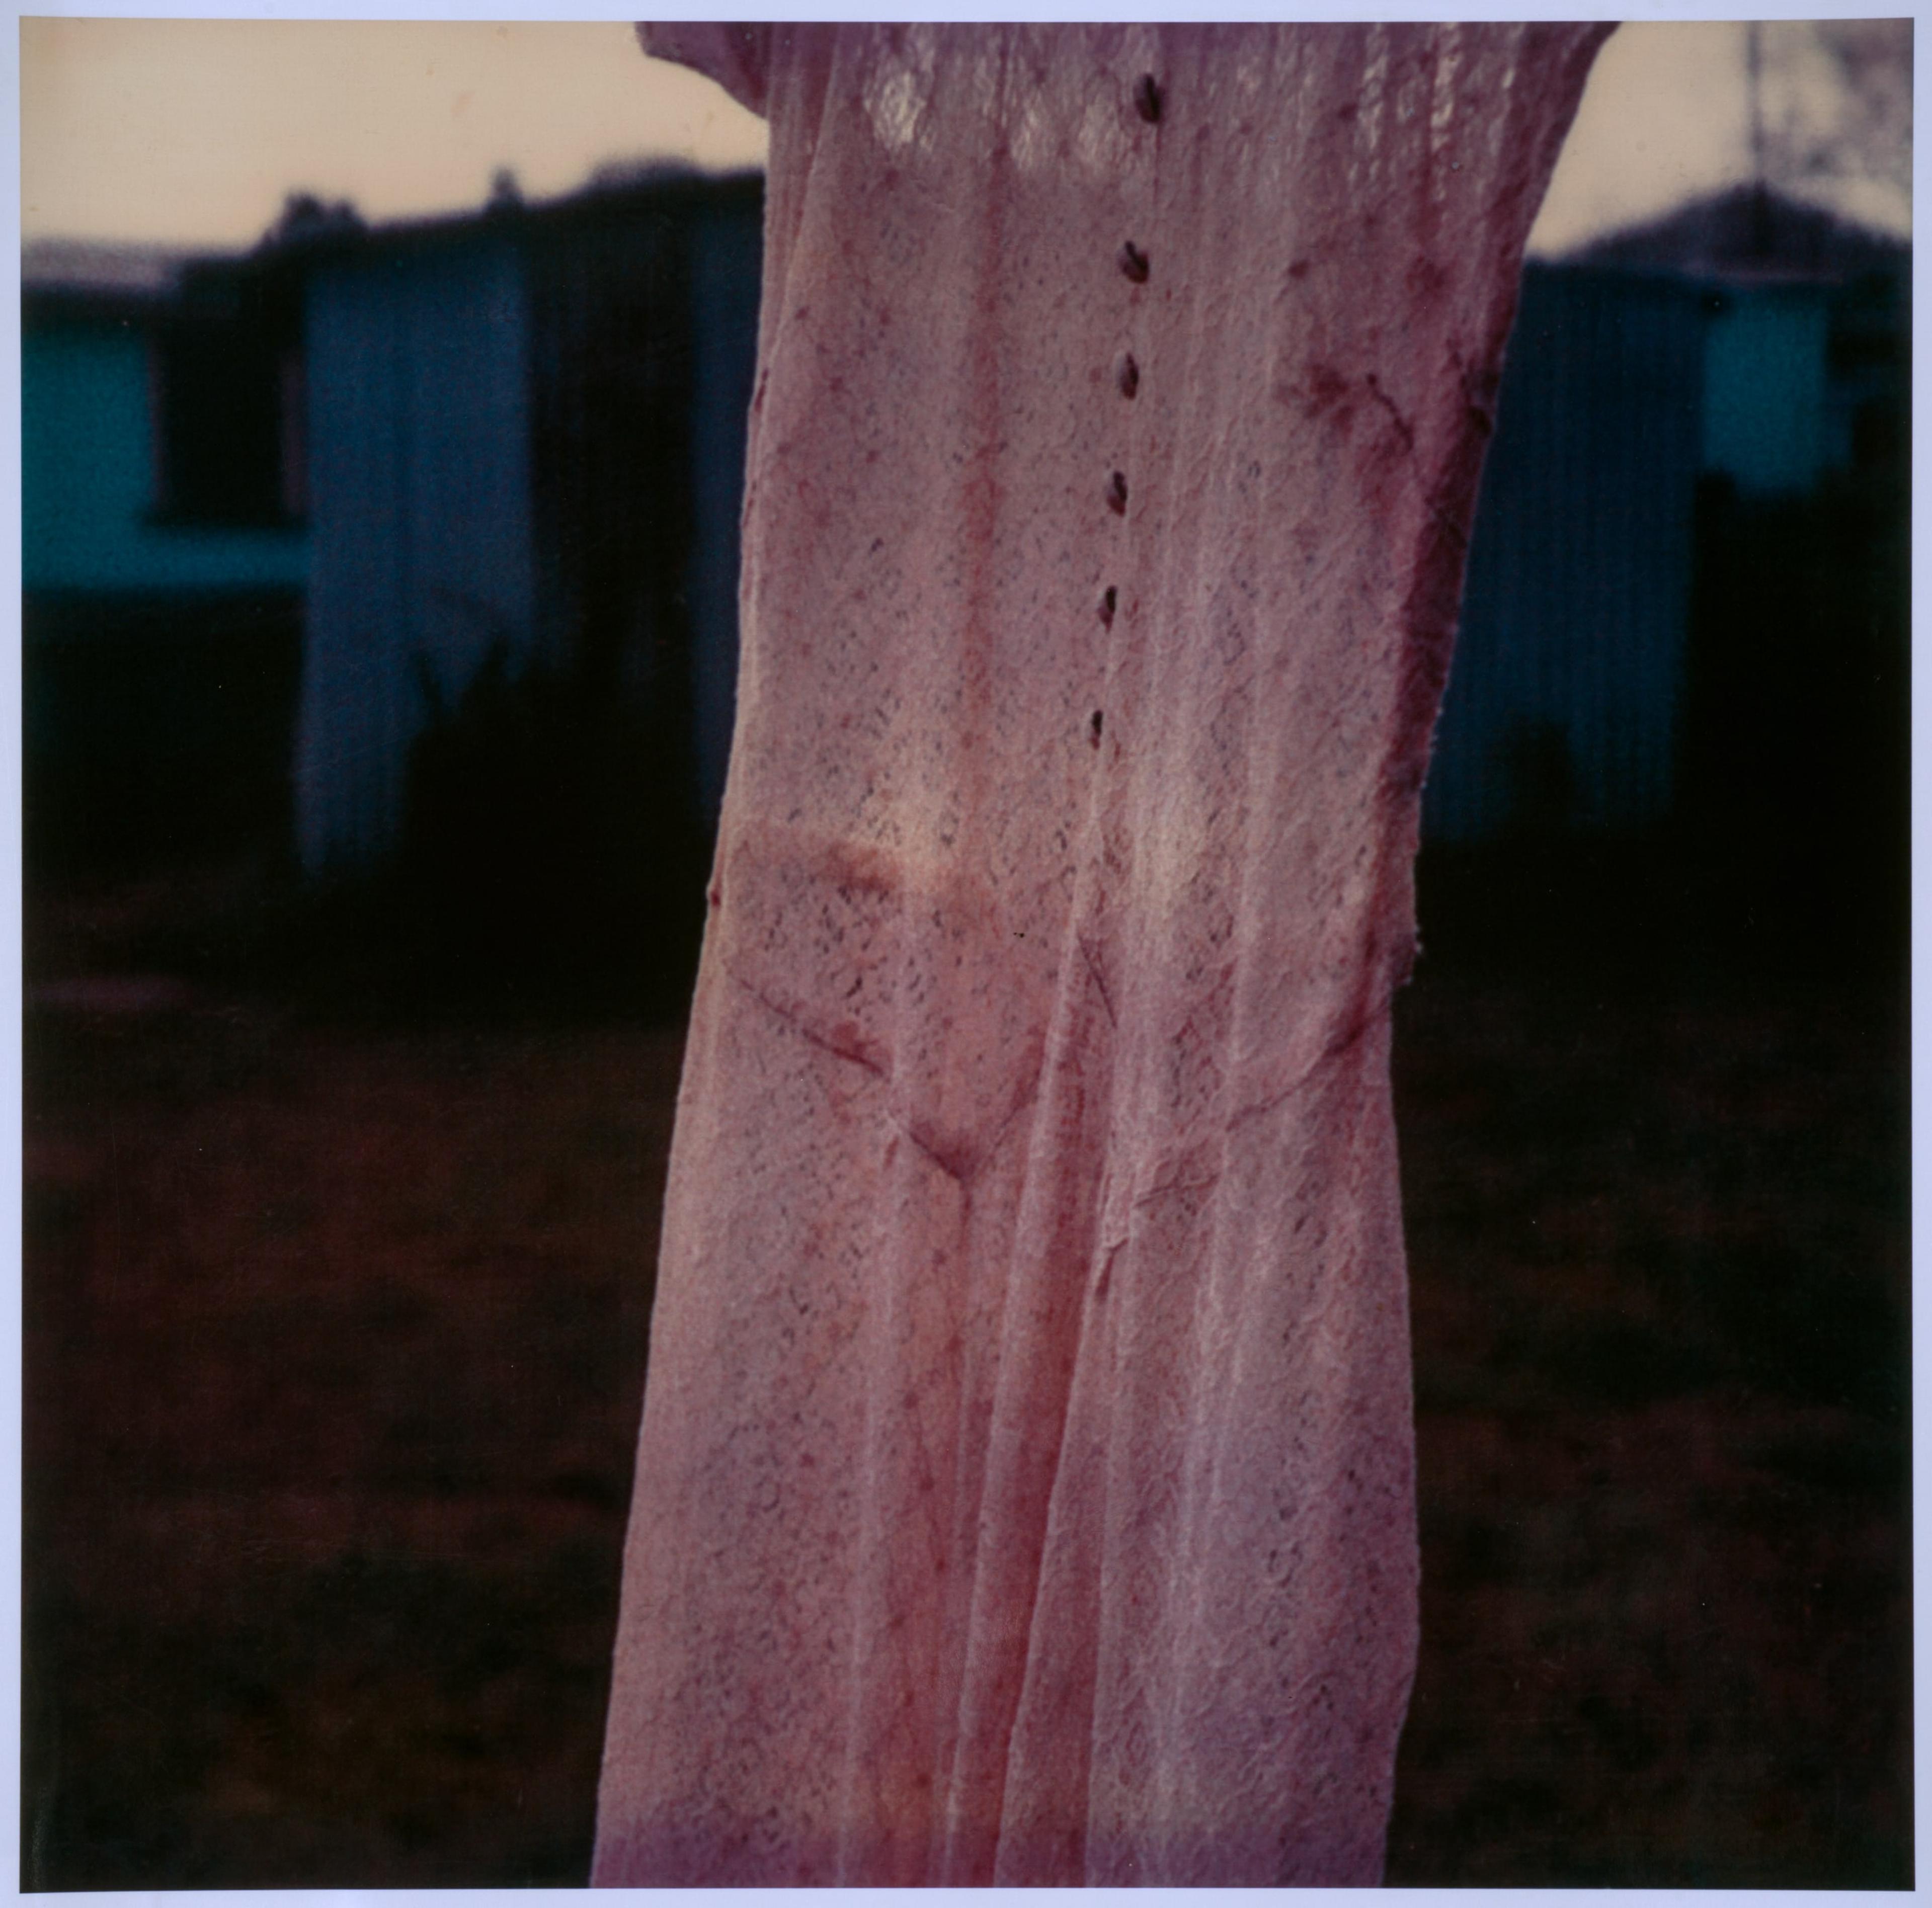 Janet Bayly, Lace Dress 2(detail), 1979/2002, five colour Lambda prints from SX-70 Polaroids. Courtesy of the artist in Fragments of a World, curated by Sandy Callister, Adam Art Gallery Te Pātaka Toi, Victoria University of Wellington (photo: Shaun Waugh)